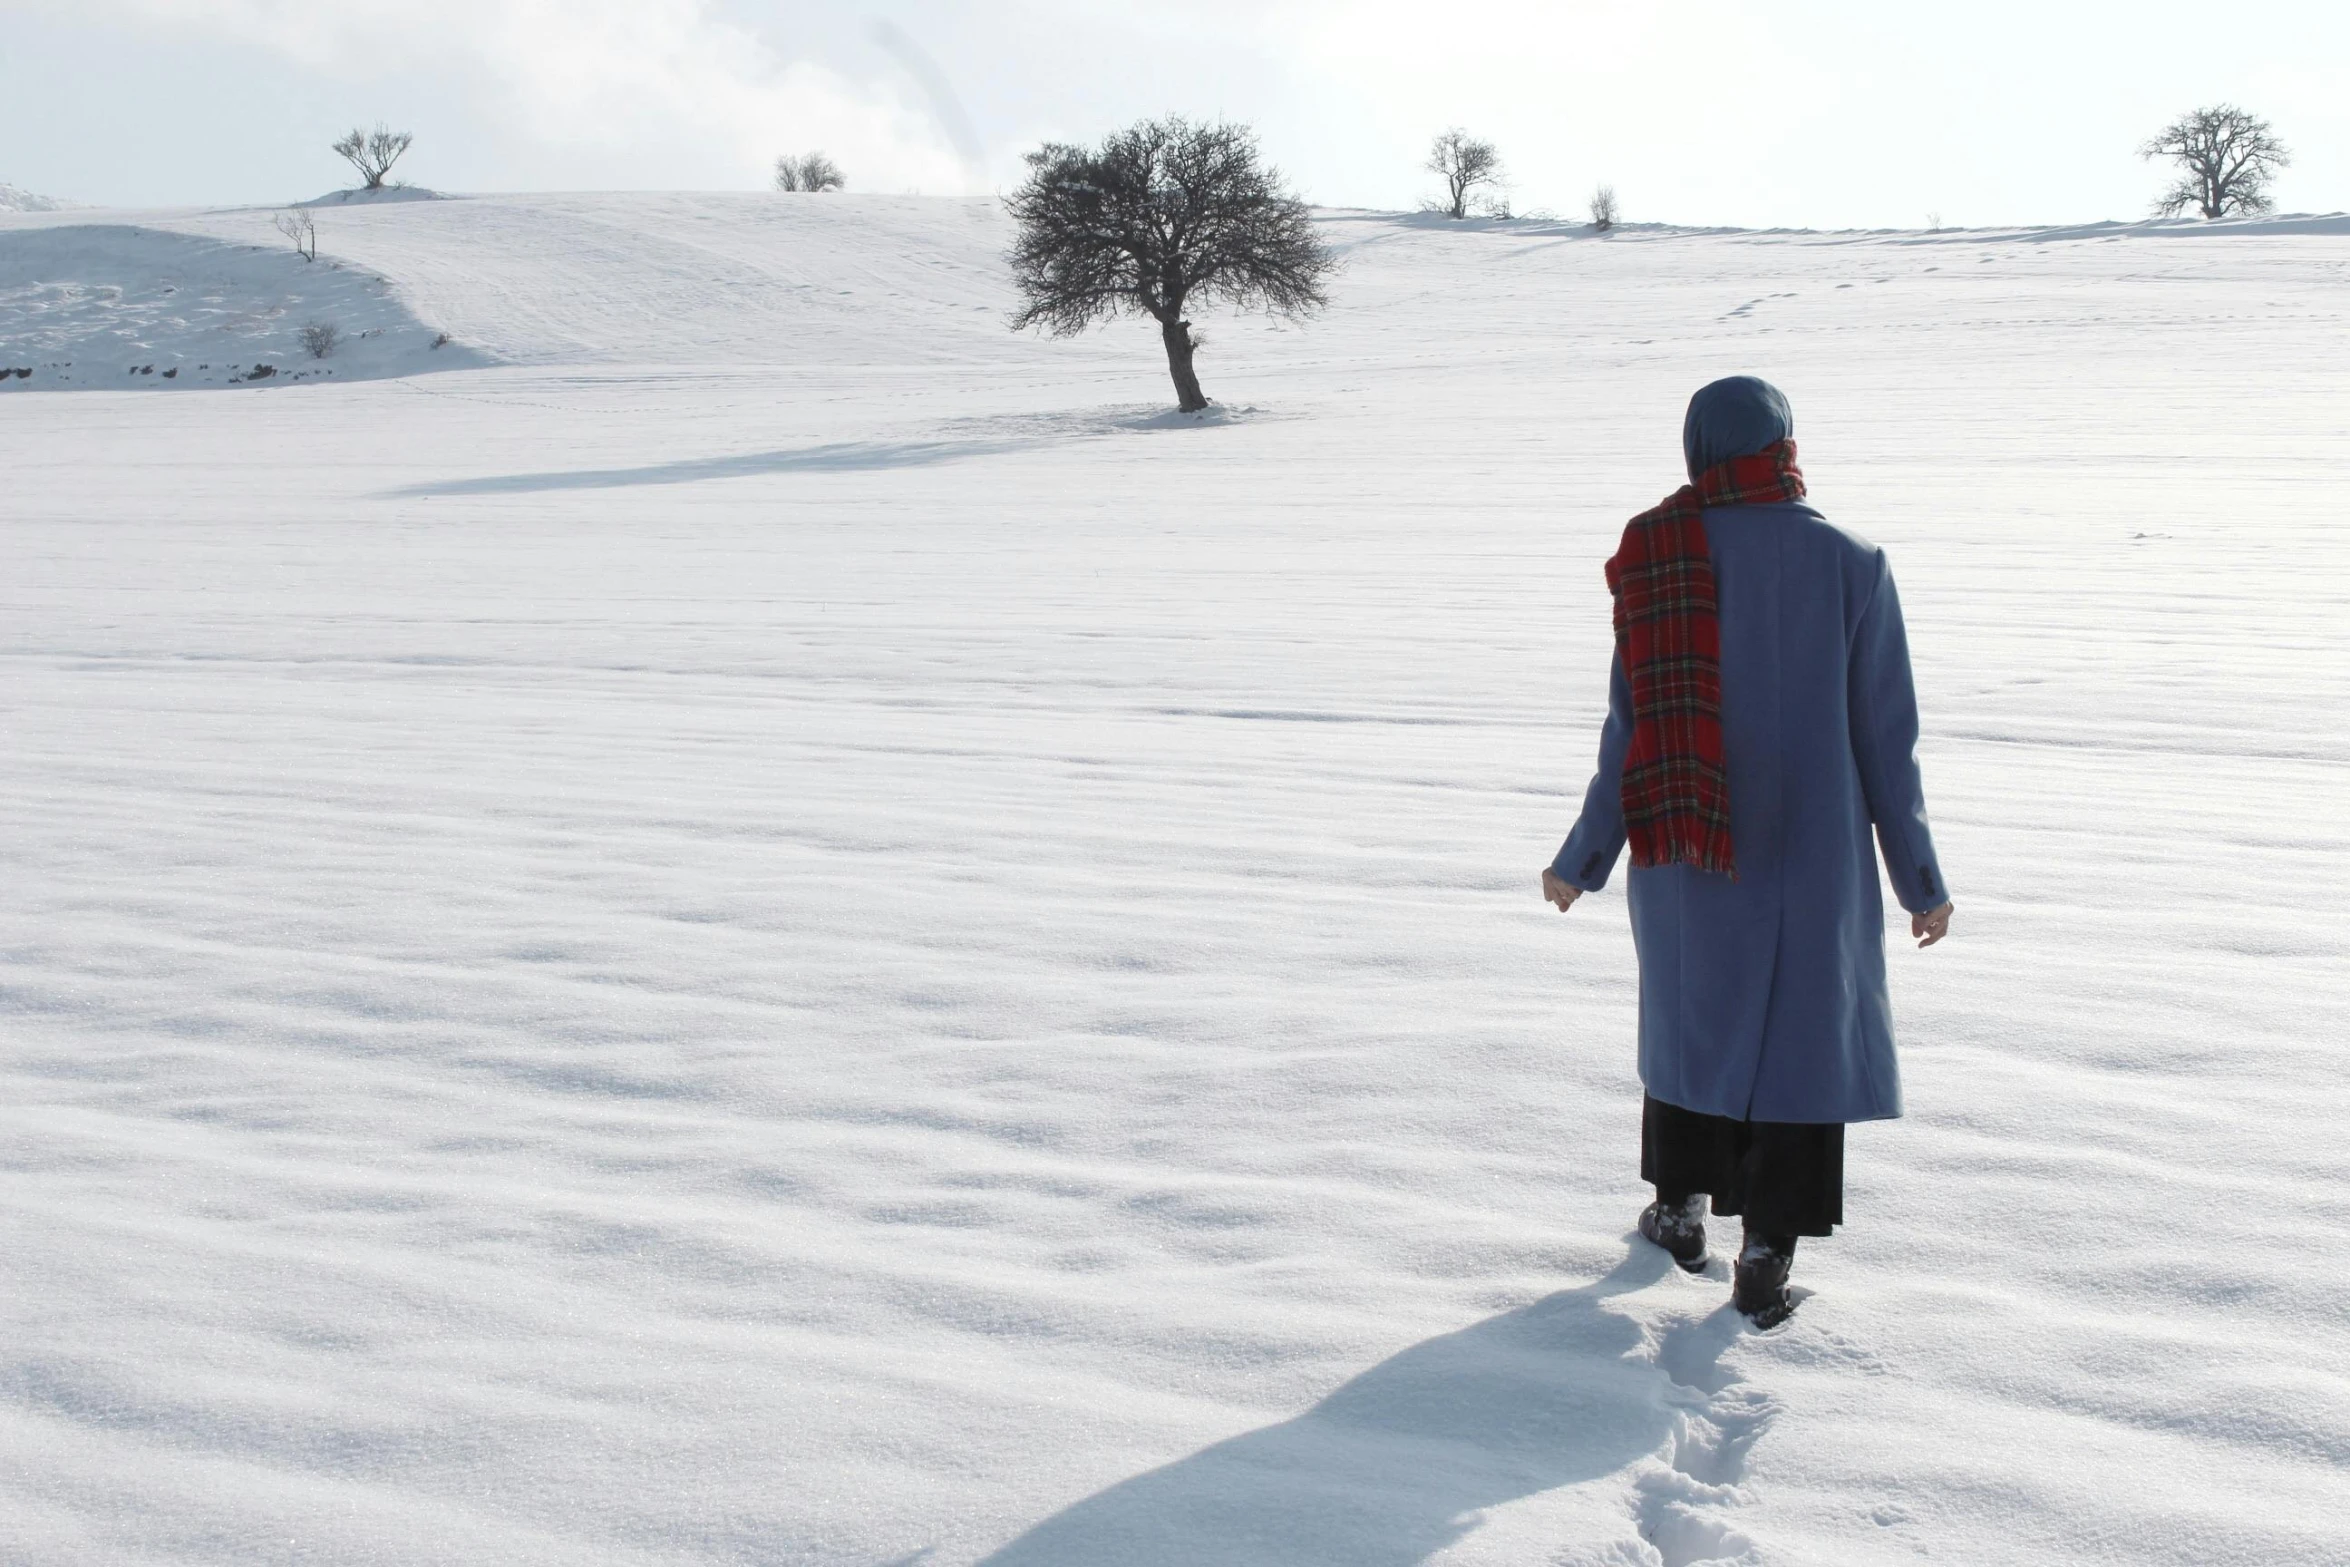 a person walking across a snow covered field with a tree in the background